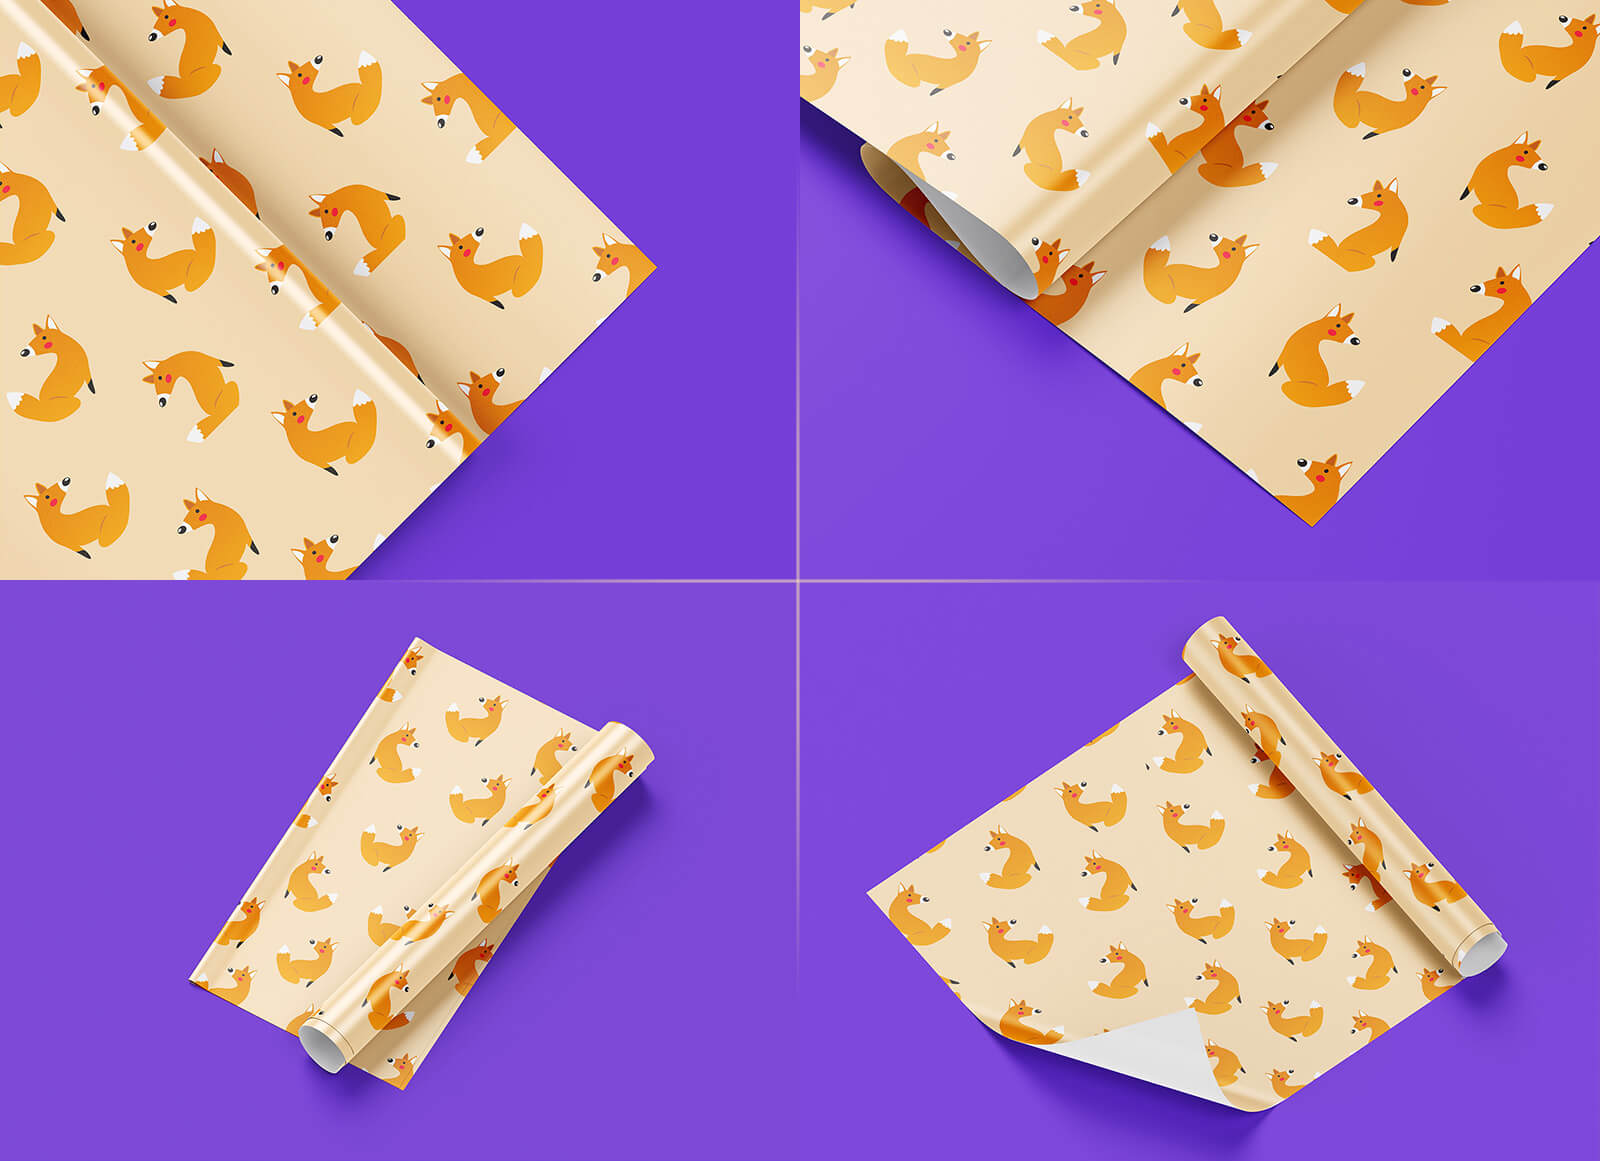 Free Wrapping Paper Mockup PSD Set by Free PSD Templates on Dribbble